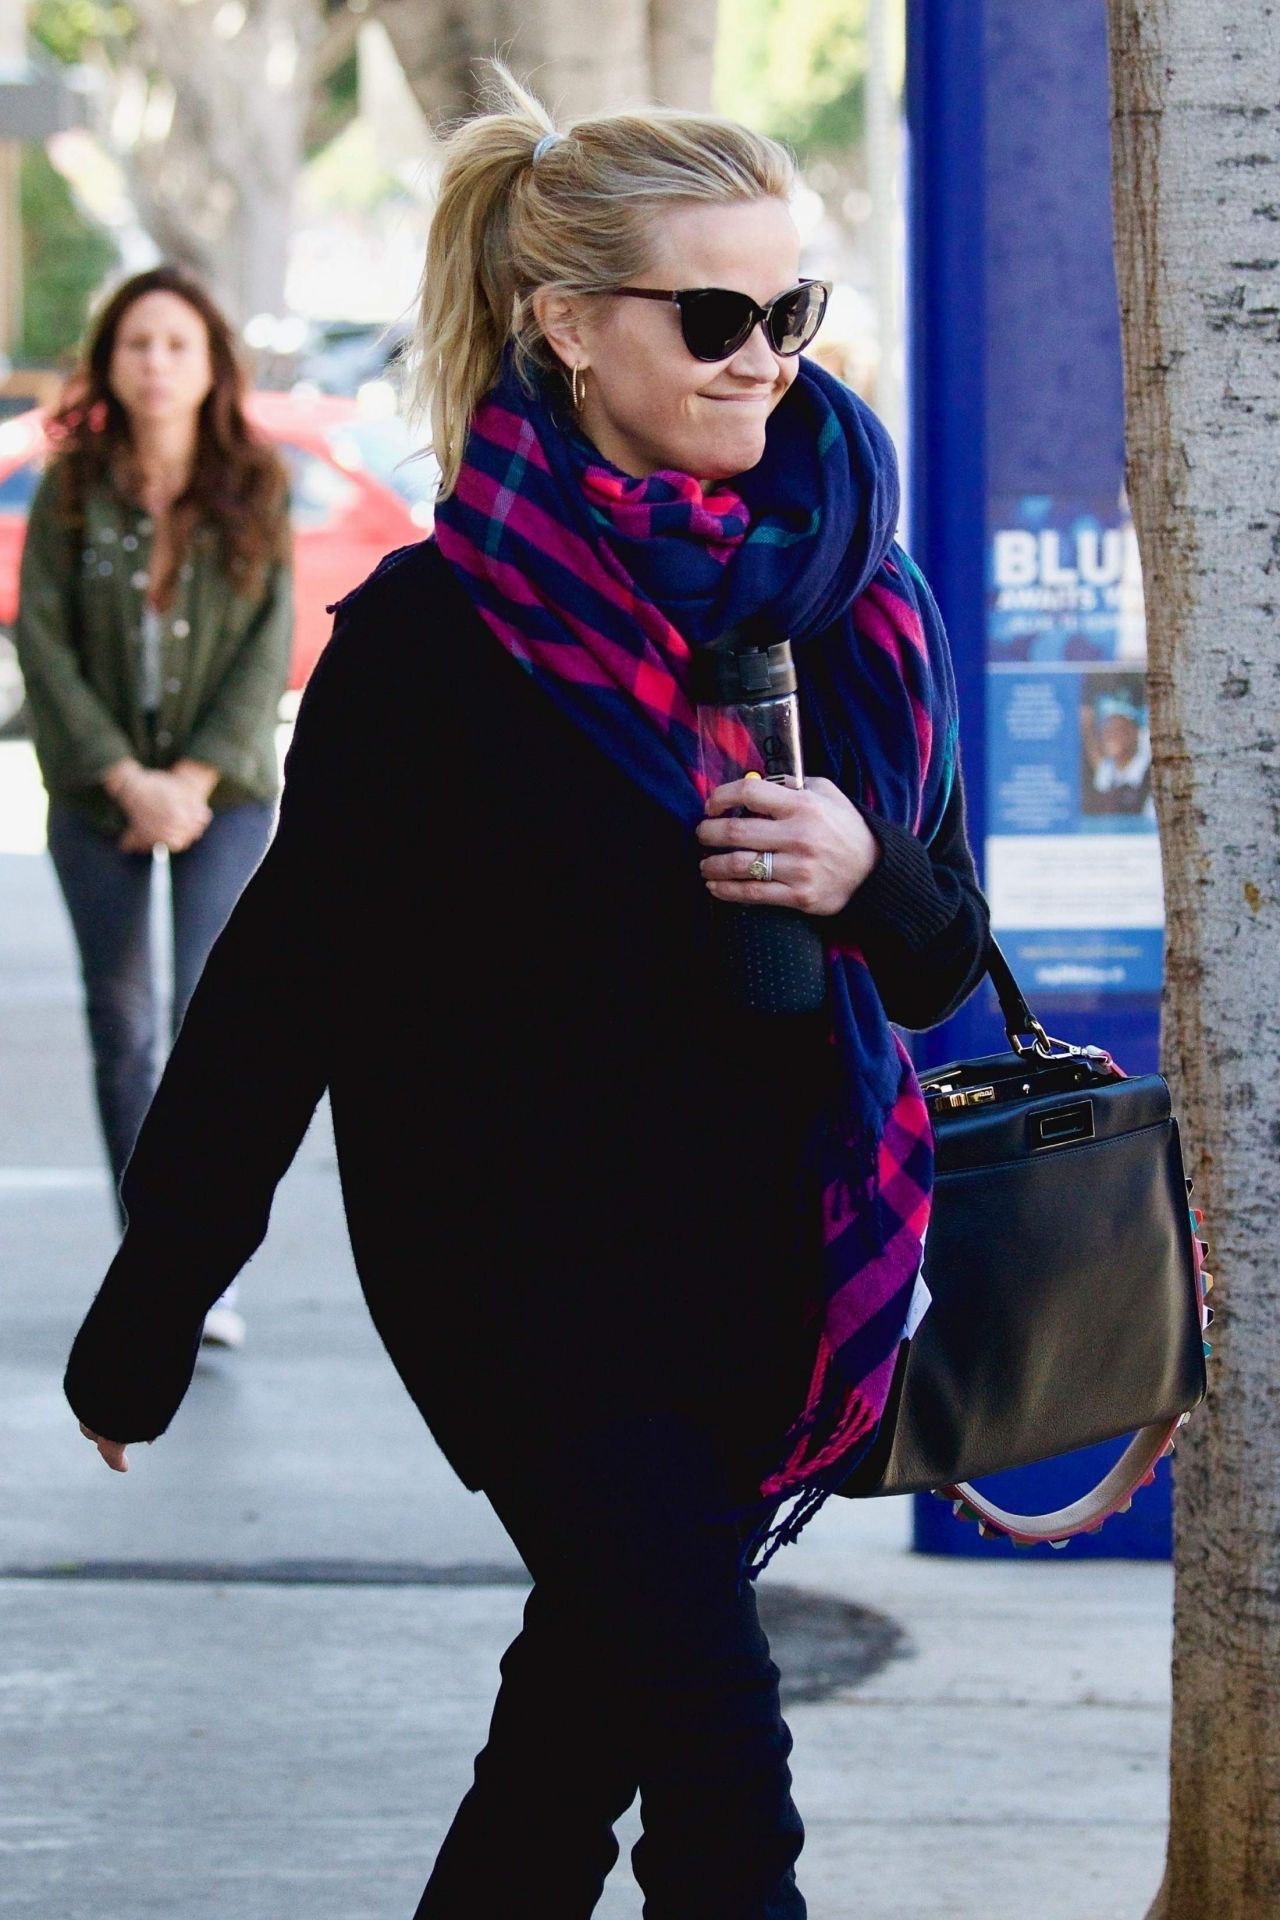 Reese Witherspoon Santa Monica October 20, 2018 – Star Style